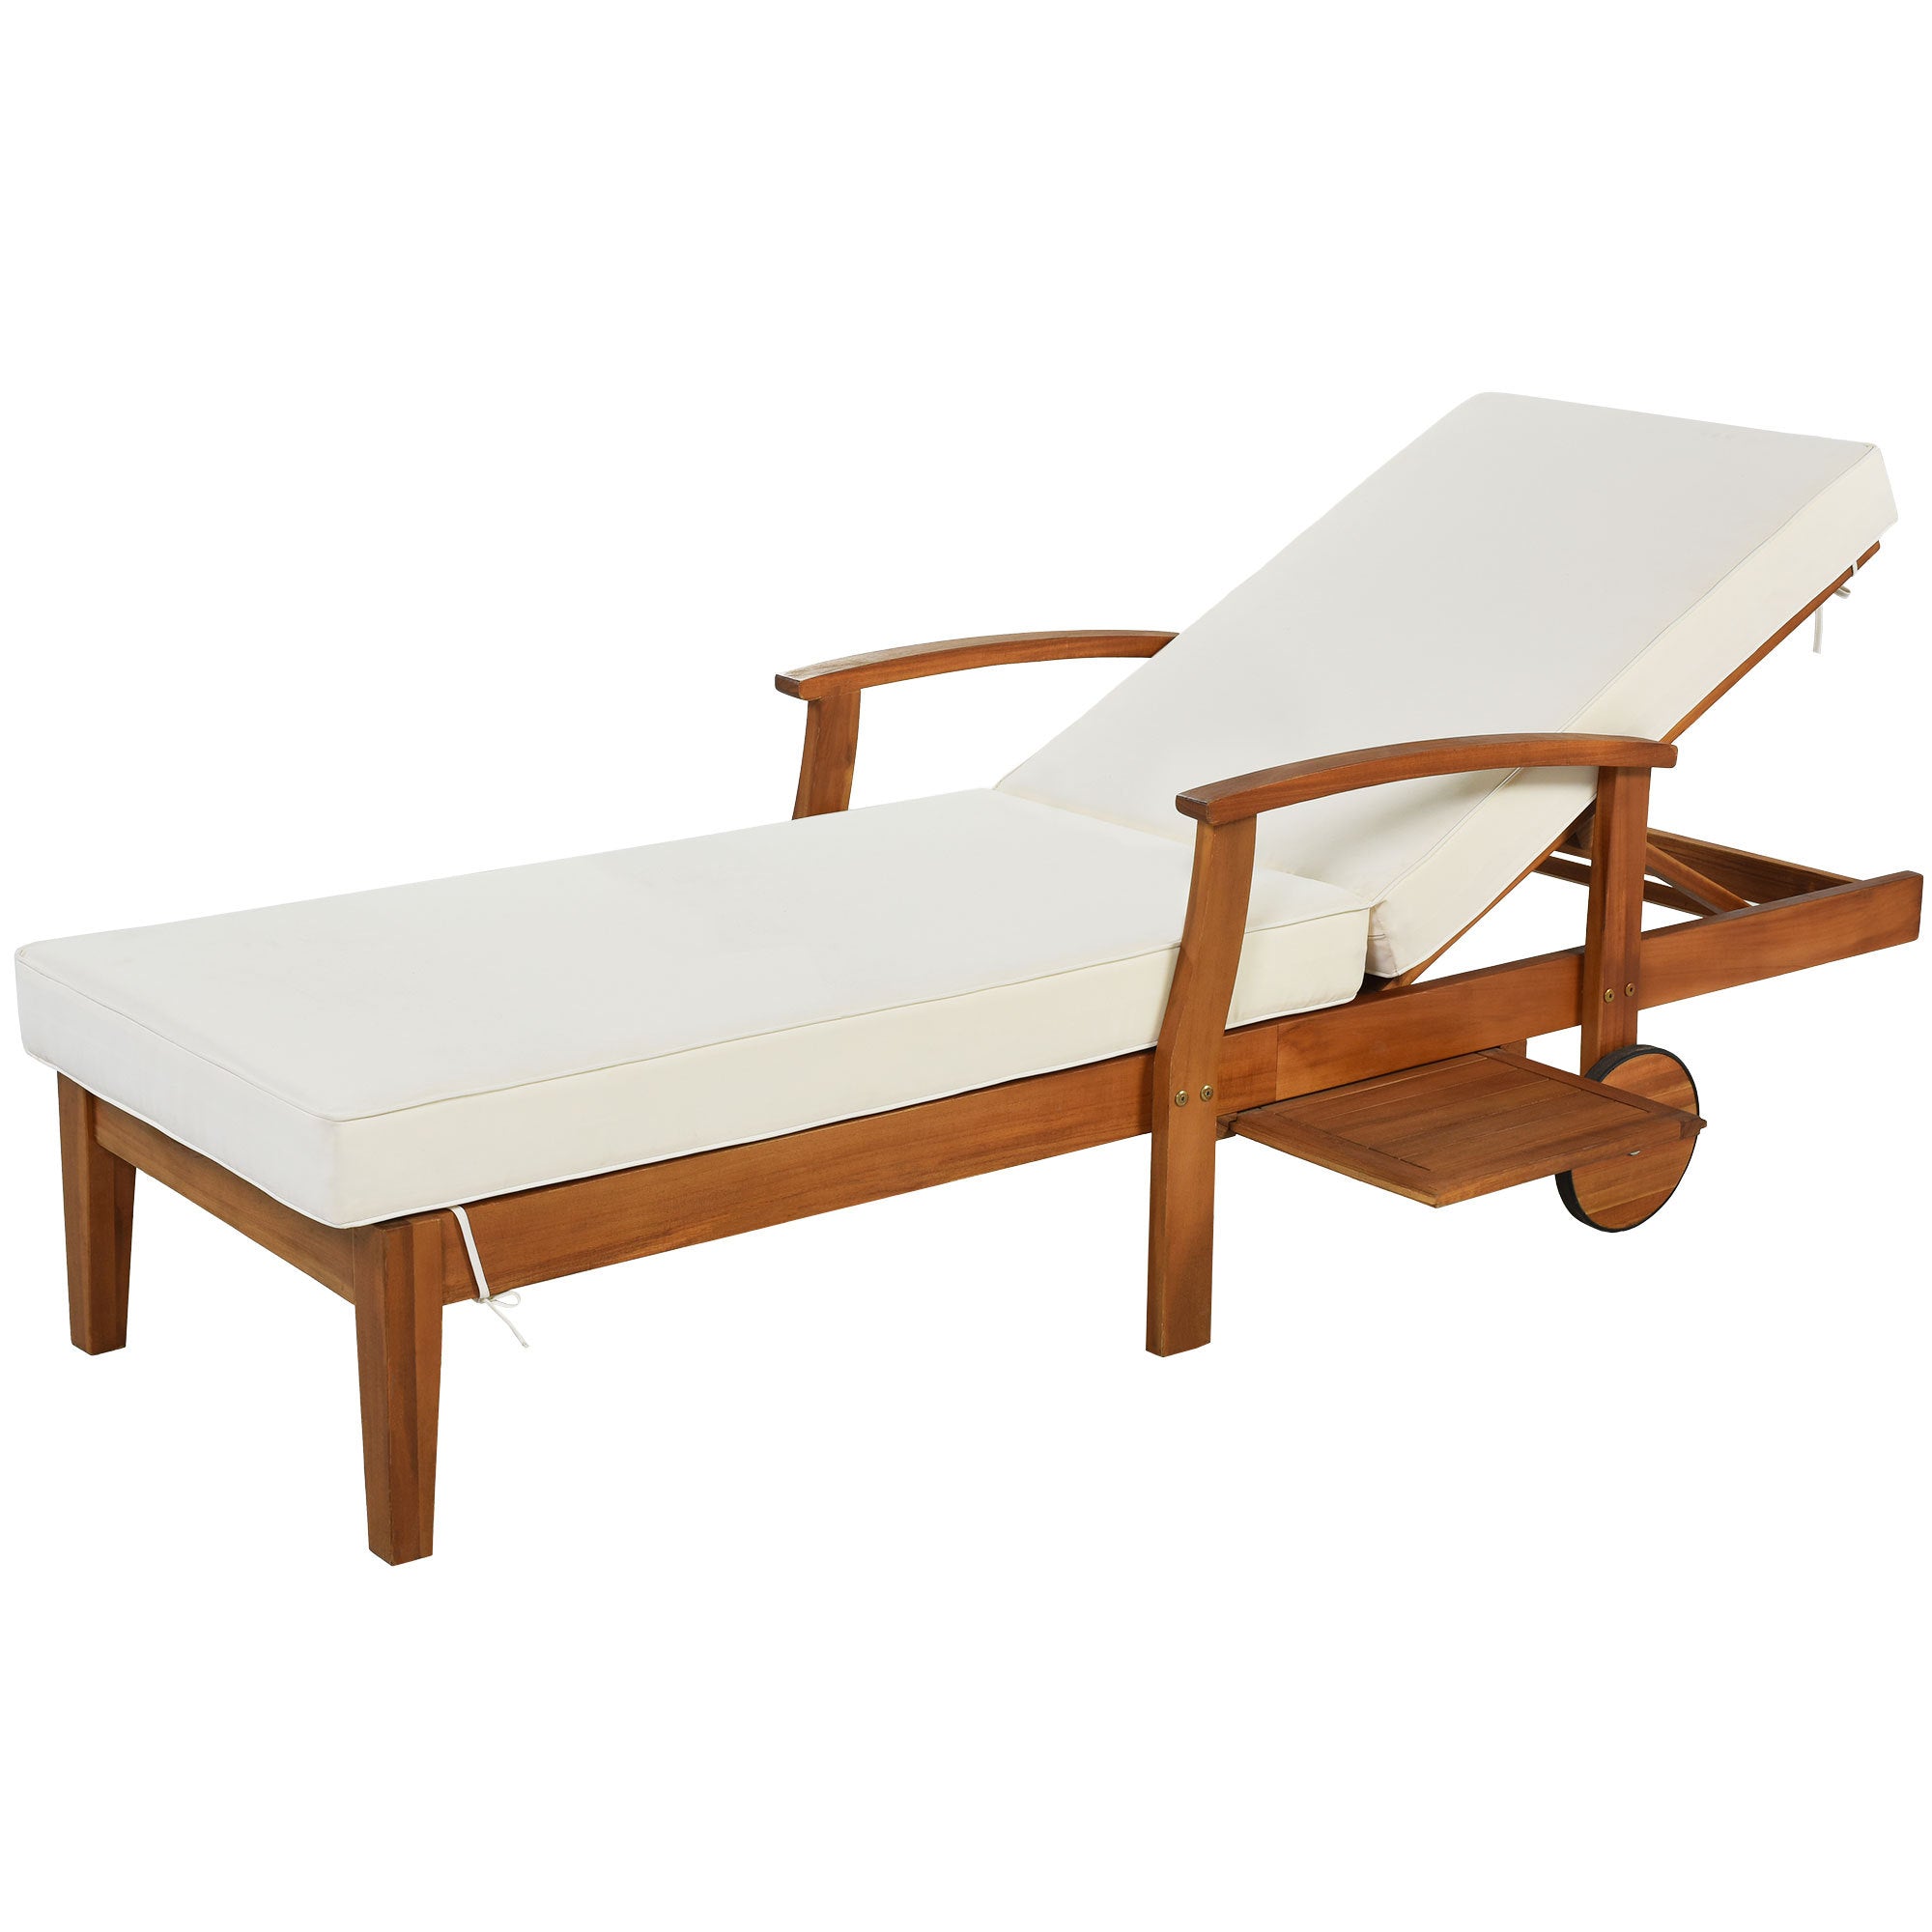 Outdoor Solid Wood 78.8" Chaise Lounge Patio